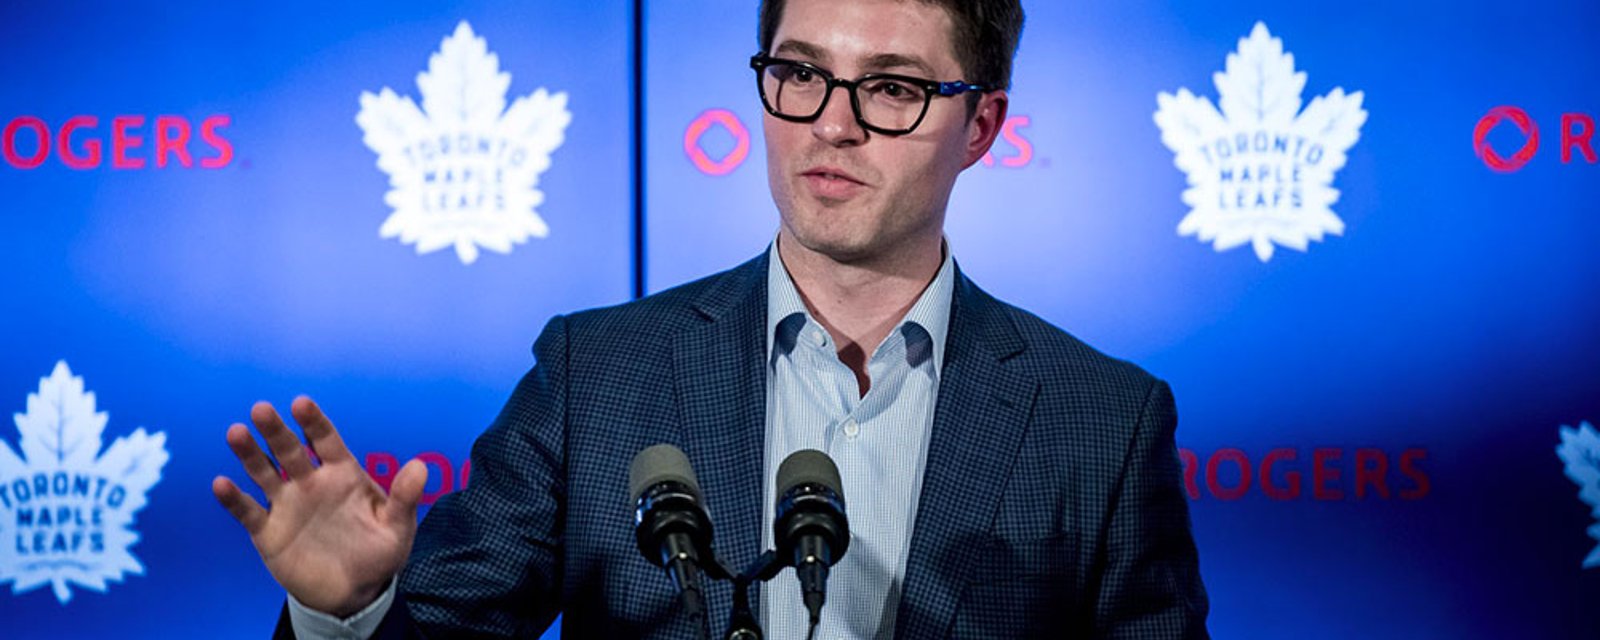 Dubas drops some expletives in tirade over media and fan criticism of his team